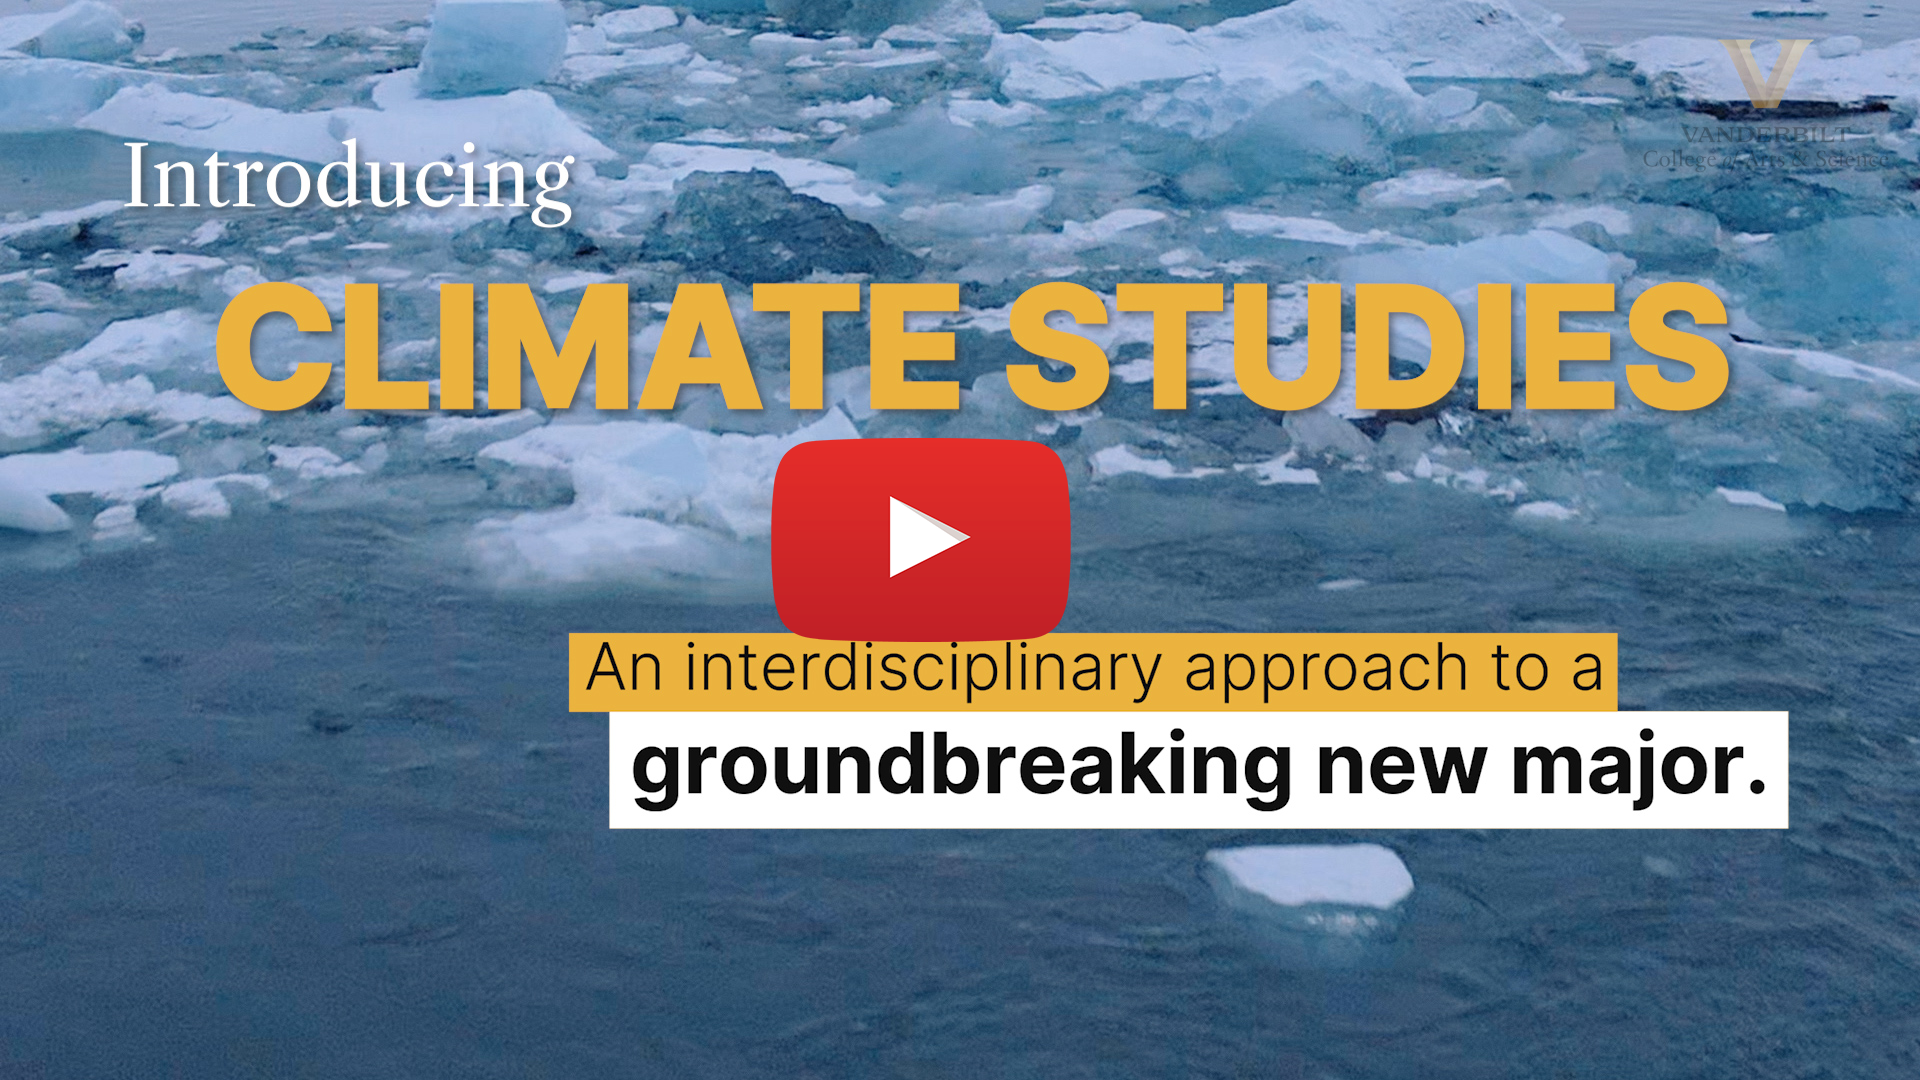 Introducing Climate Studies: An interdisciplinary approach to a groundbreaking new major